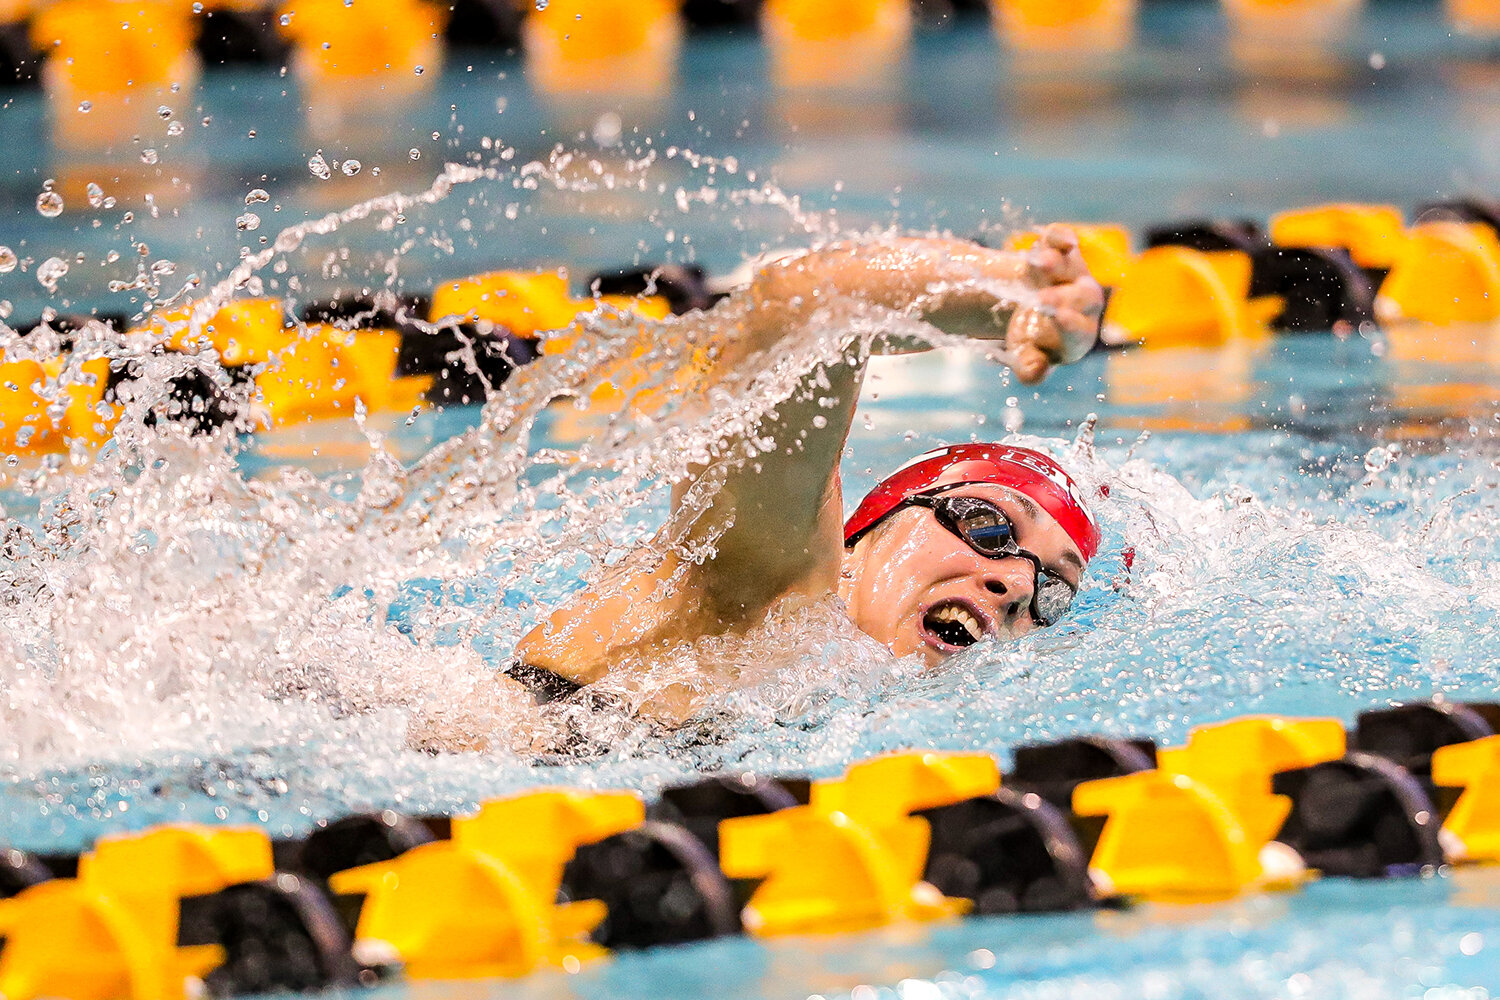  Francesca Bertotto swims a preliminary heat of the 400 Yard IM during the Big Ten Women’s Swimming and Diving Championships at the Campus Welfare and Recreation Center in Iowa City, IA on Friday, Feb. 21, 2020. 